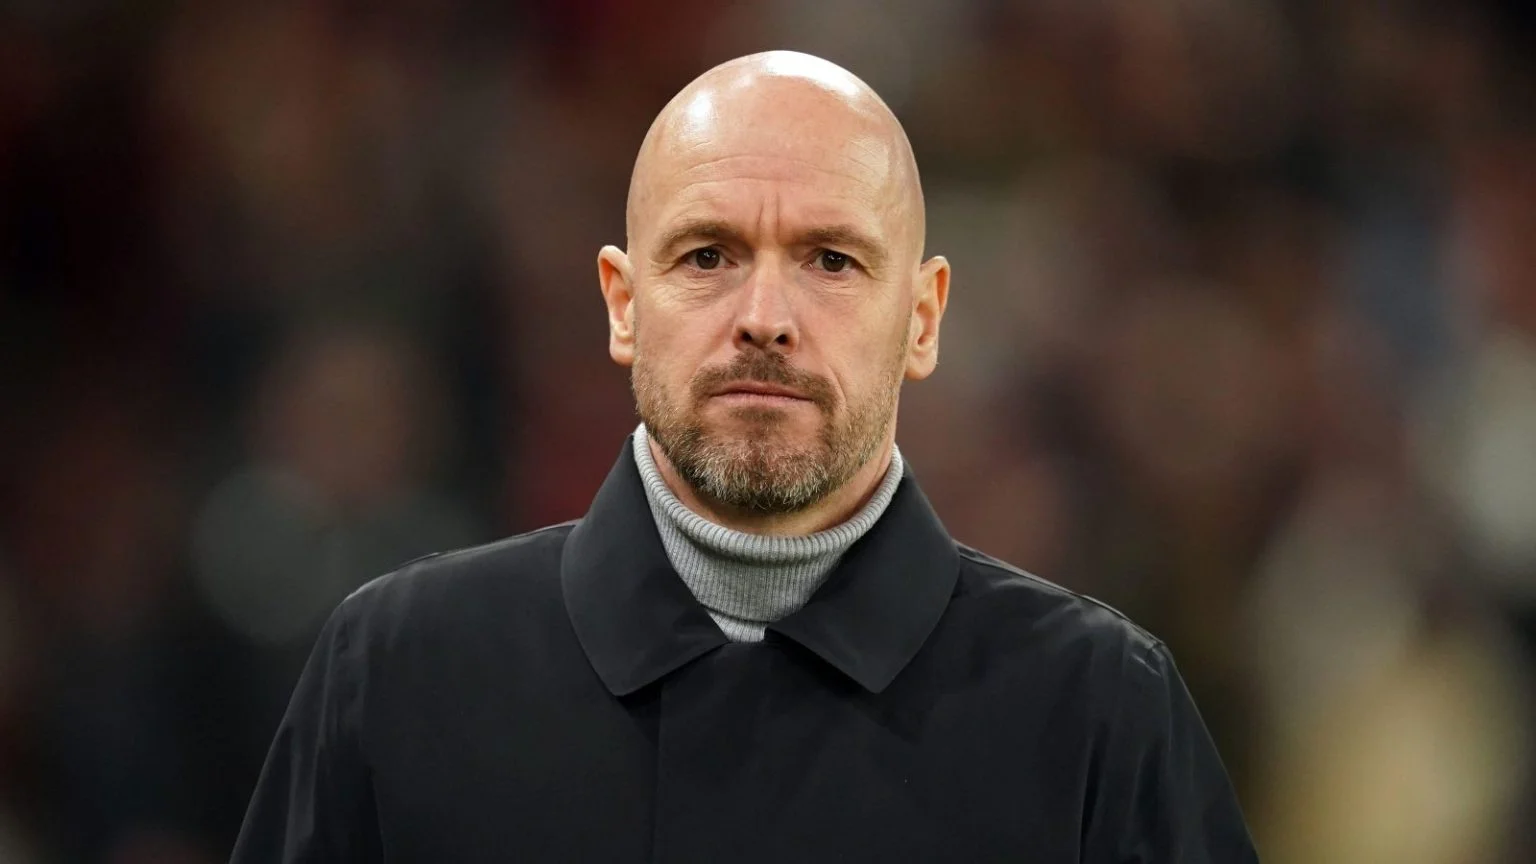 EPL: Why Man Utd lost 2-1 to Nottingham Forest – Ten Hag